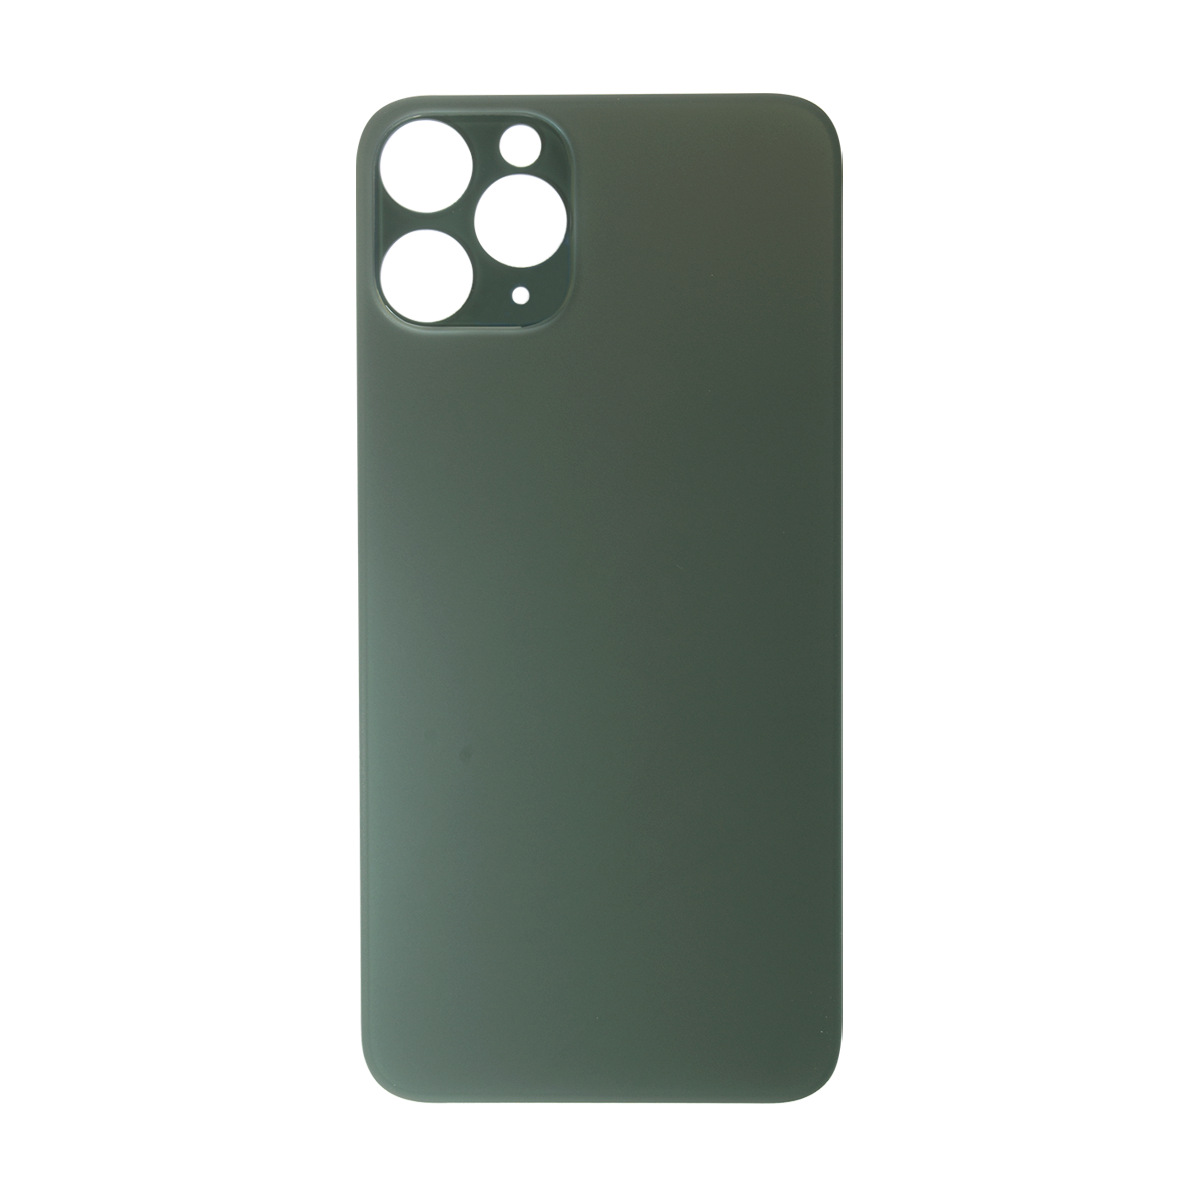 iPhone 11 Pro Max Rear Glass with Big Camera hole